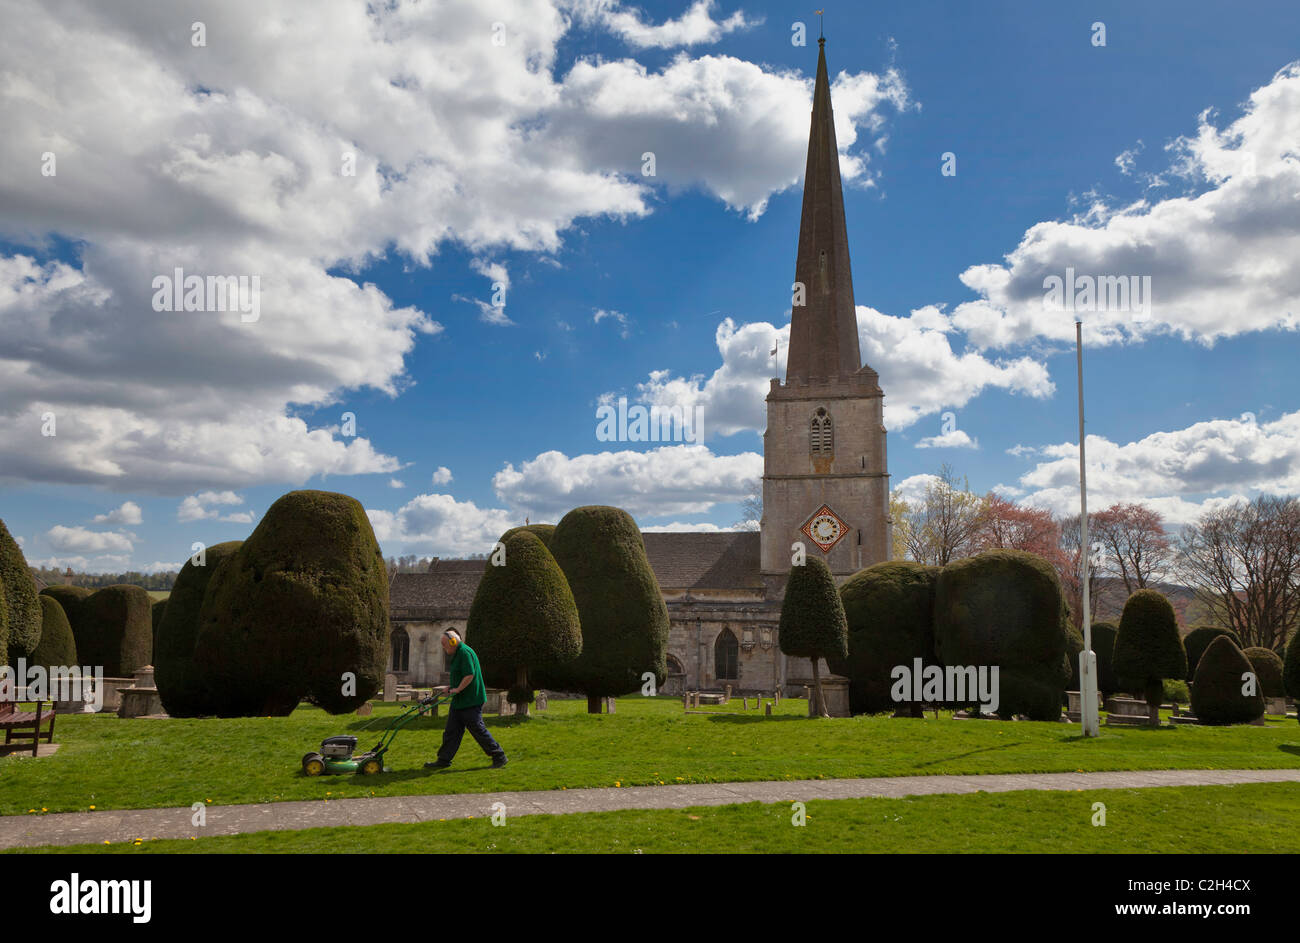 PAINSWICK CHURCH YARD WITH YEW TREES AND MAN CUTTING GRASS Stock Photo